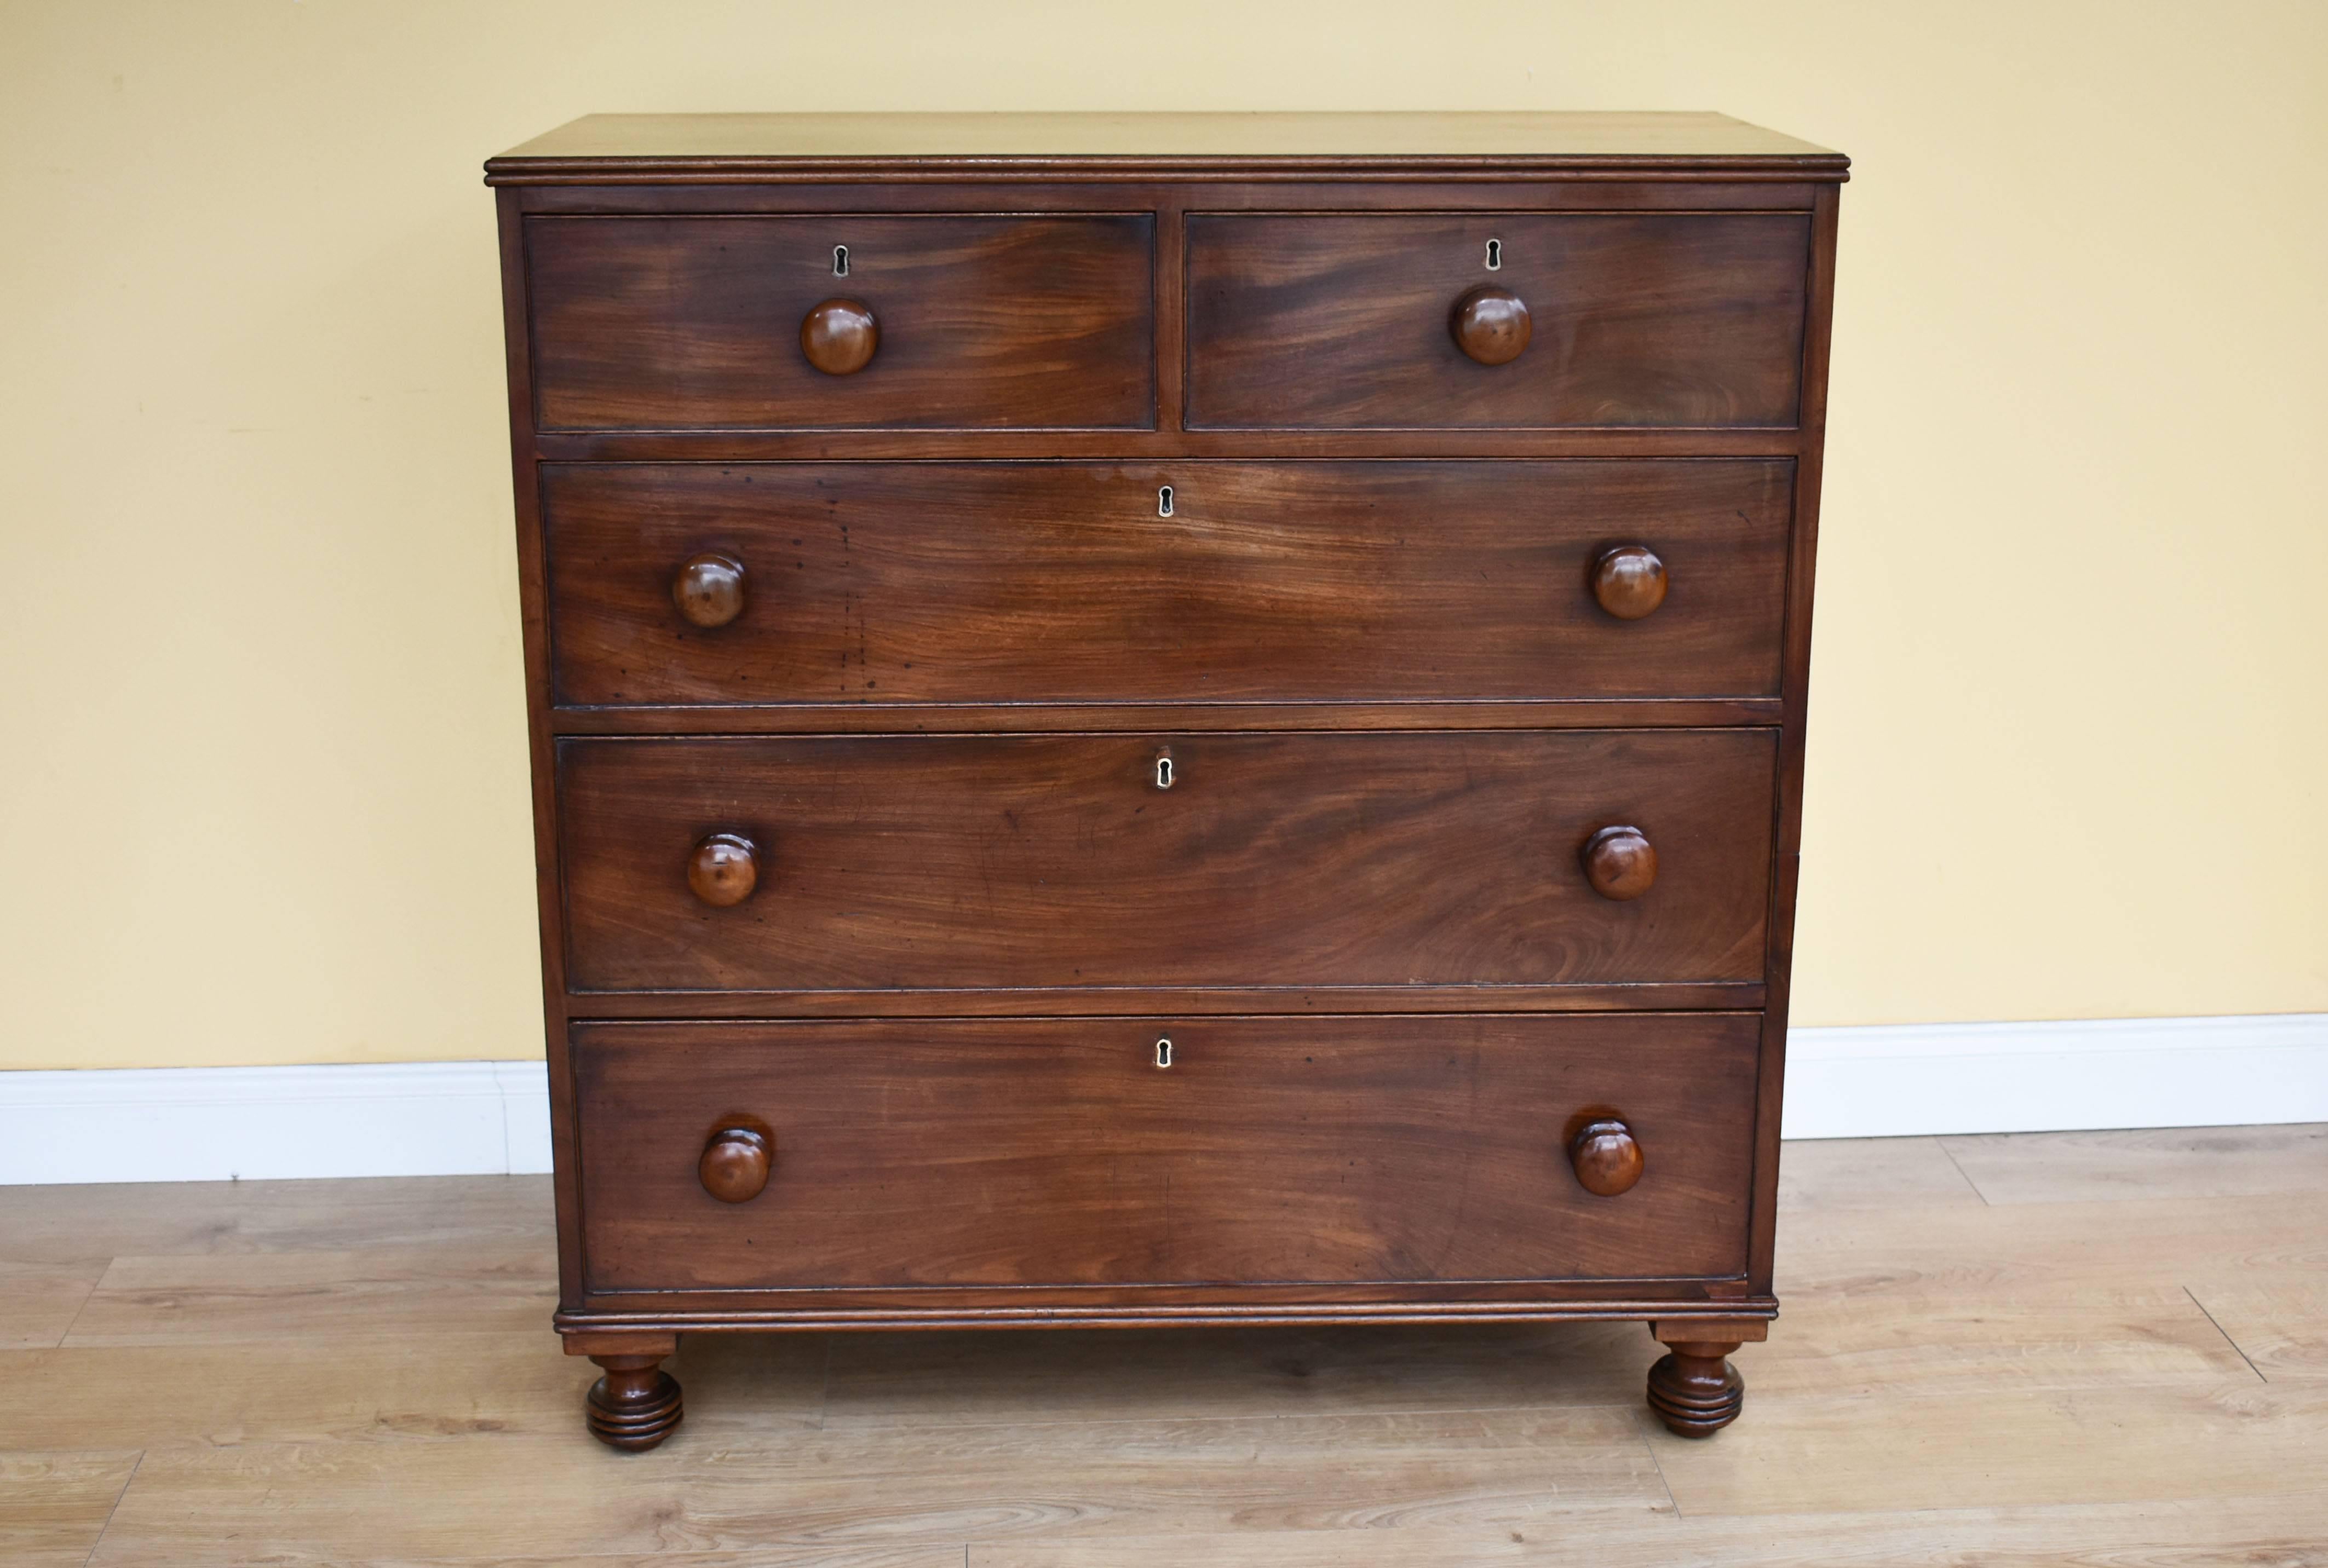 For sale is a good quality mid-Victorian mahogany chest of drawers. The chest has an arrangement of five drawers, two short at the top over three long drawers below, each with bun handles. The chest has been made in the military style, and therefore